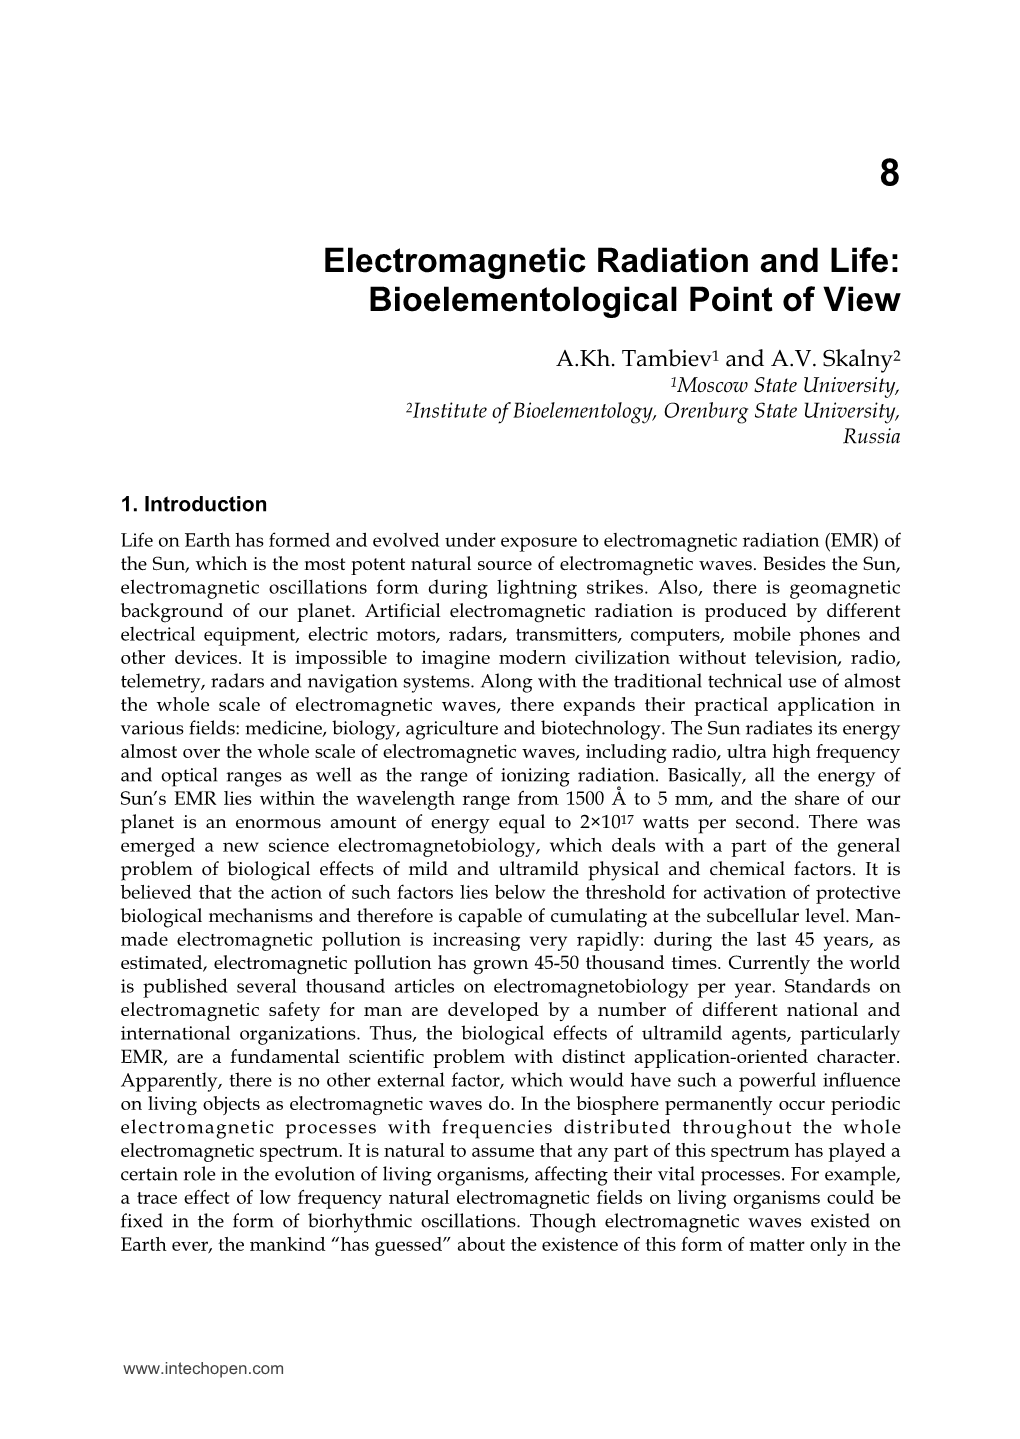 Electromagnetic Radiation and Life: Bioelementological Point of View